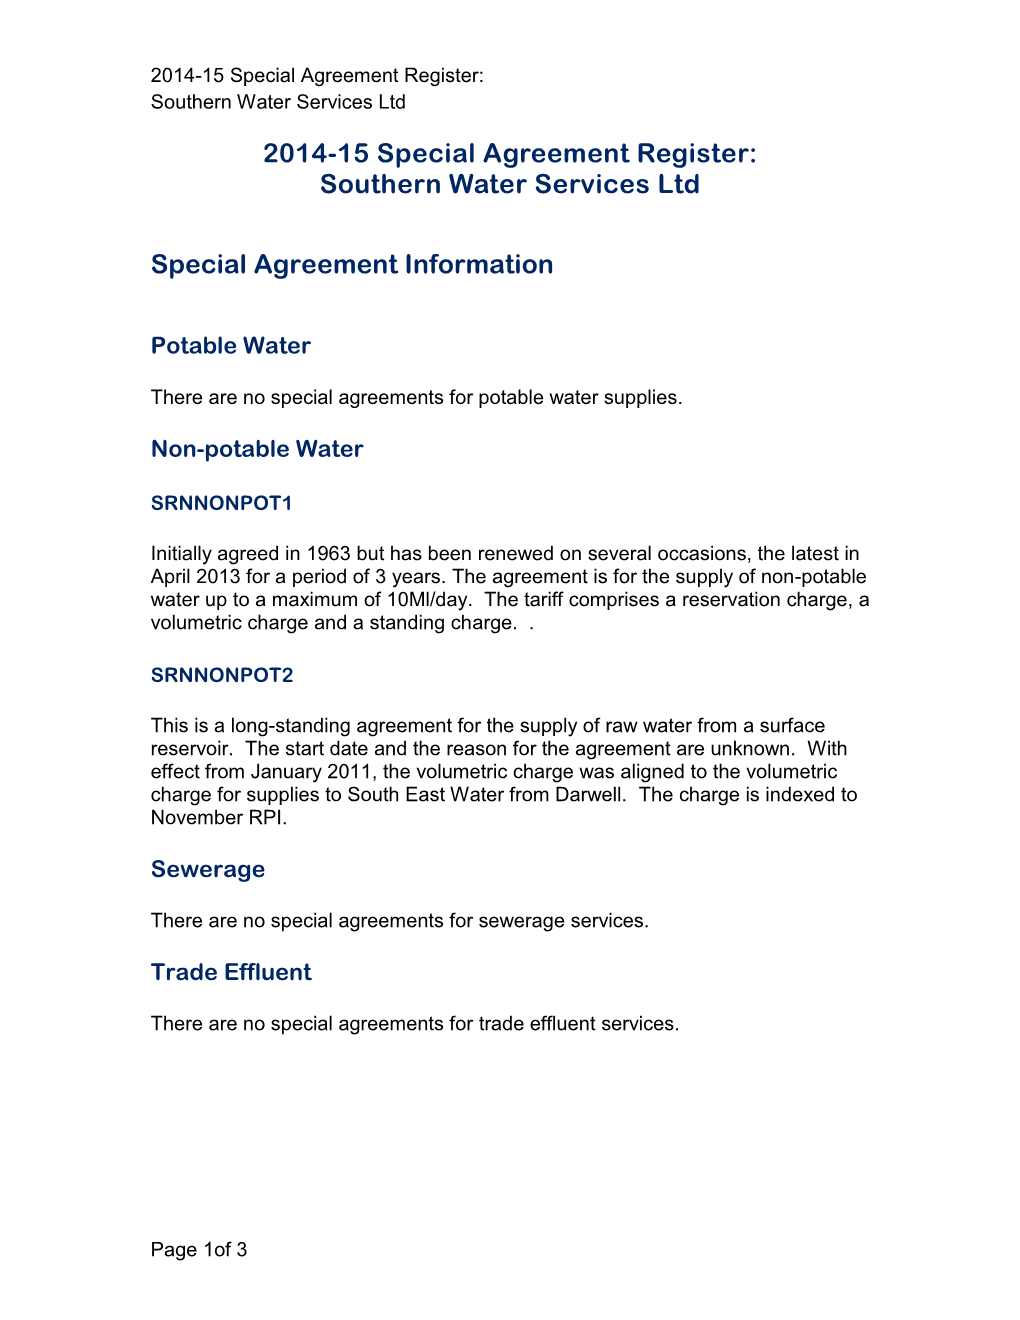 Southern Water Services Ltd Special Agreement Information